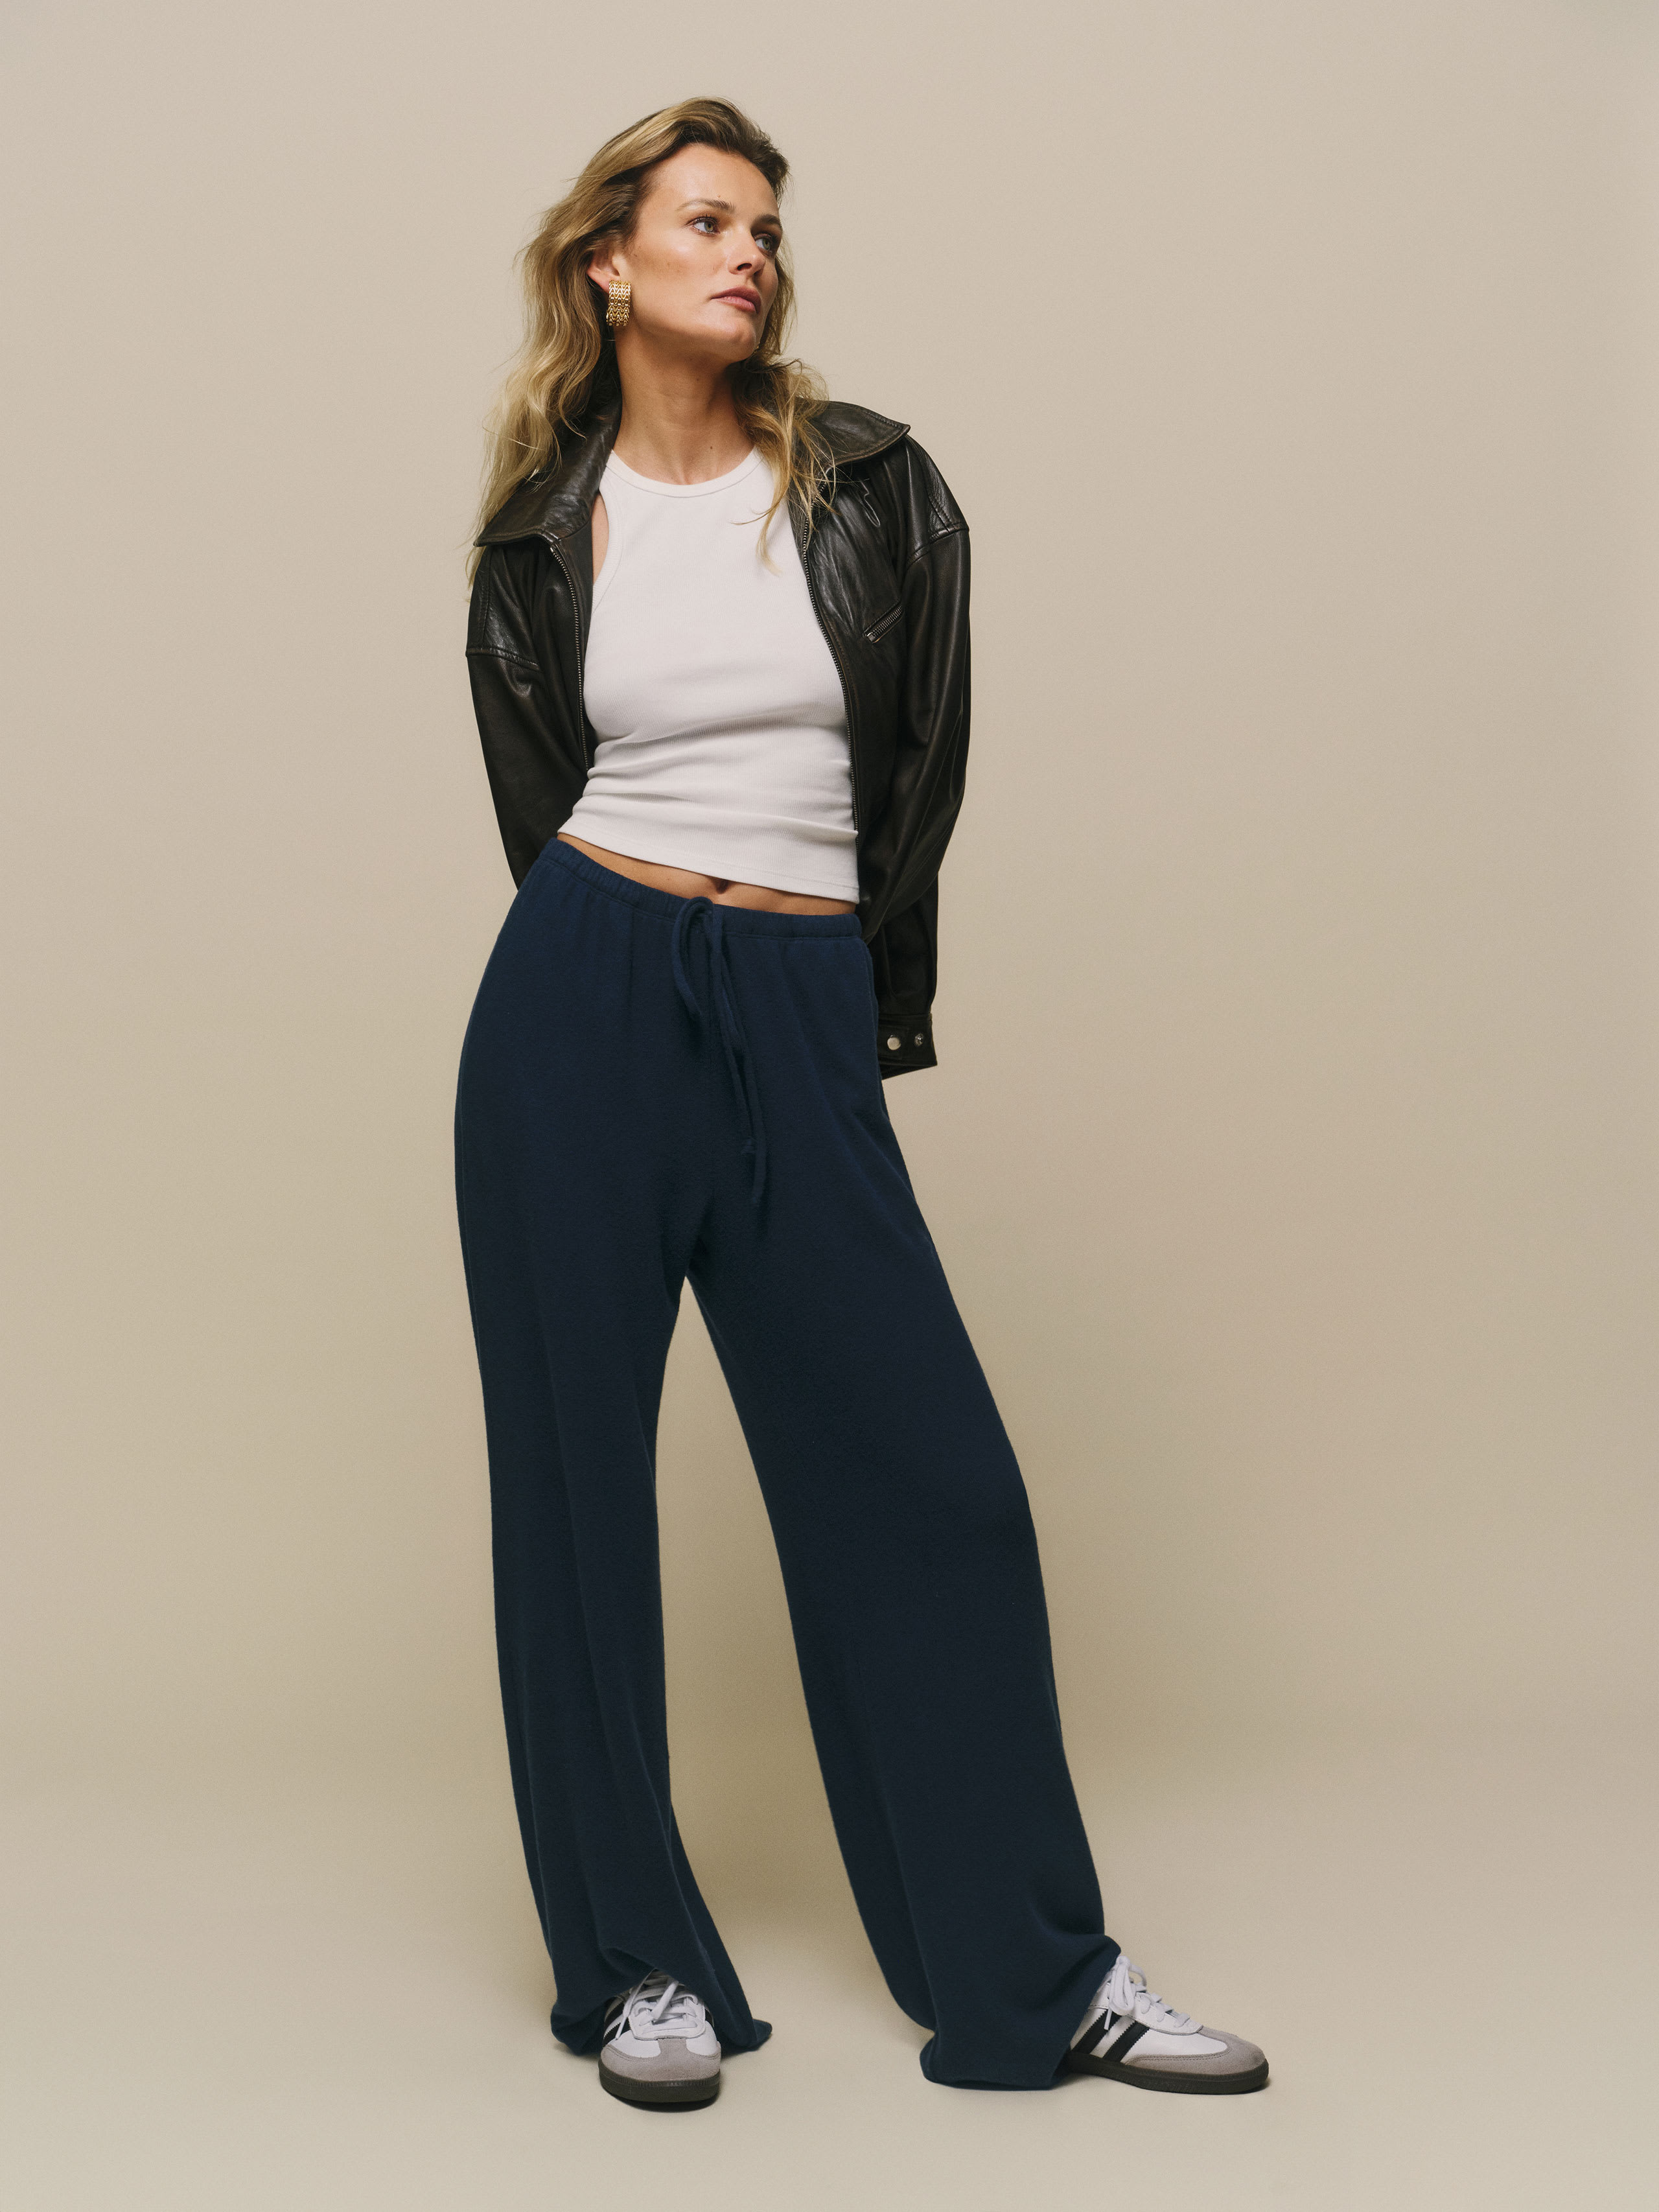 Reformation Olina Knit Pant In Midnight